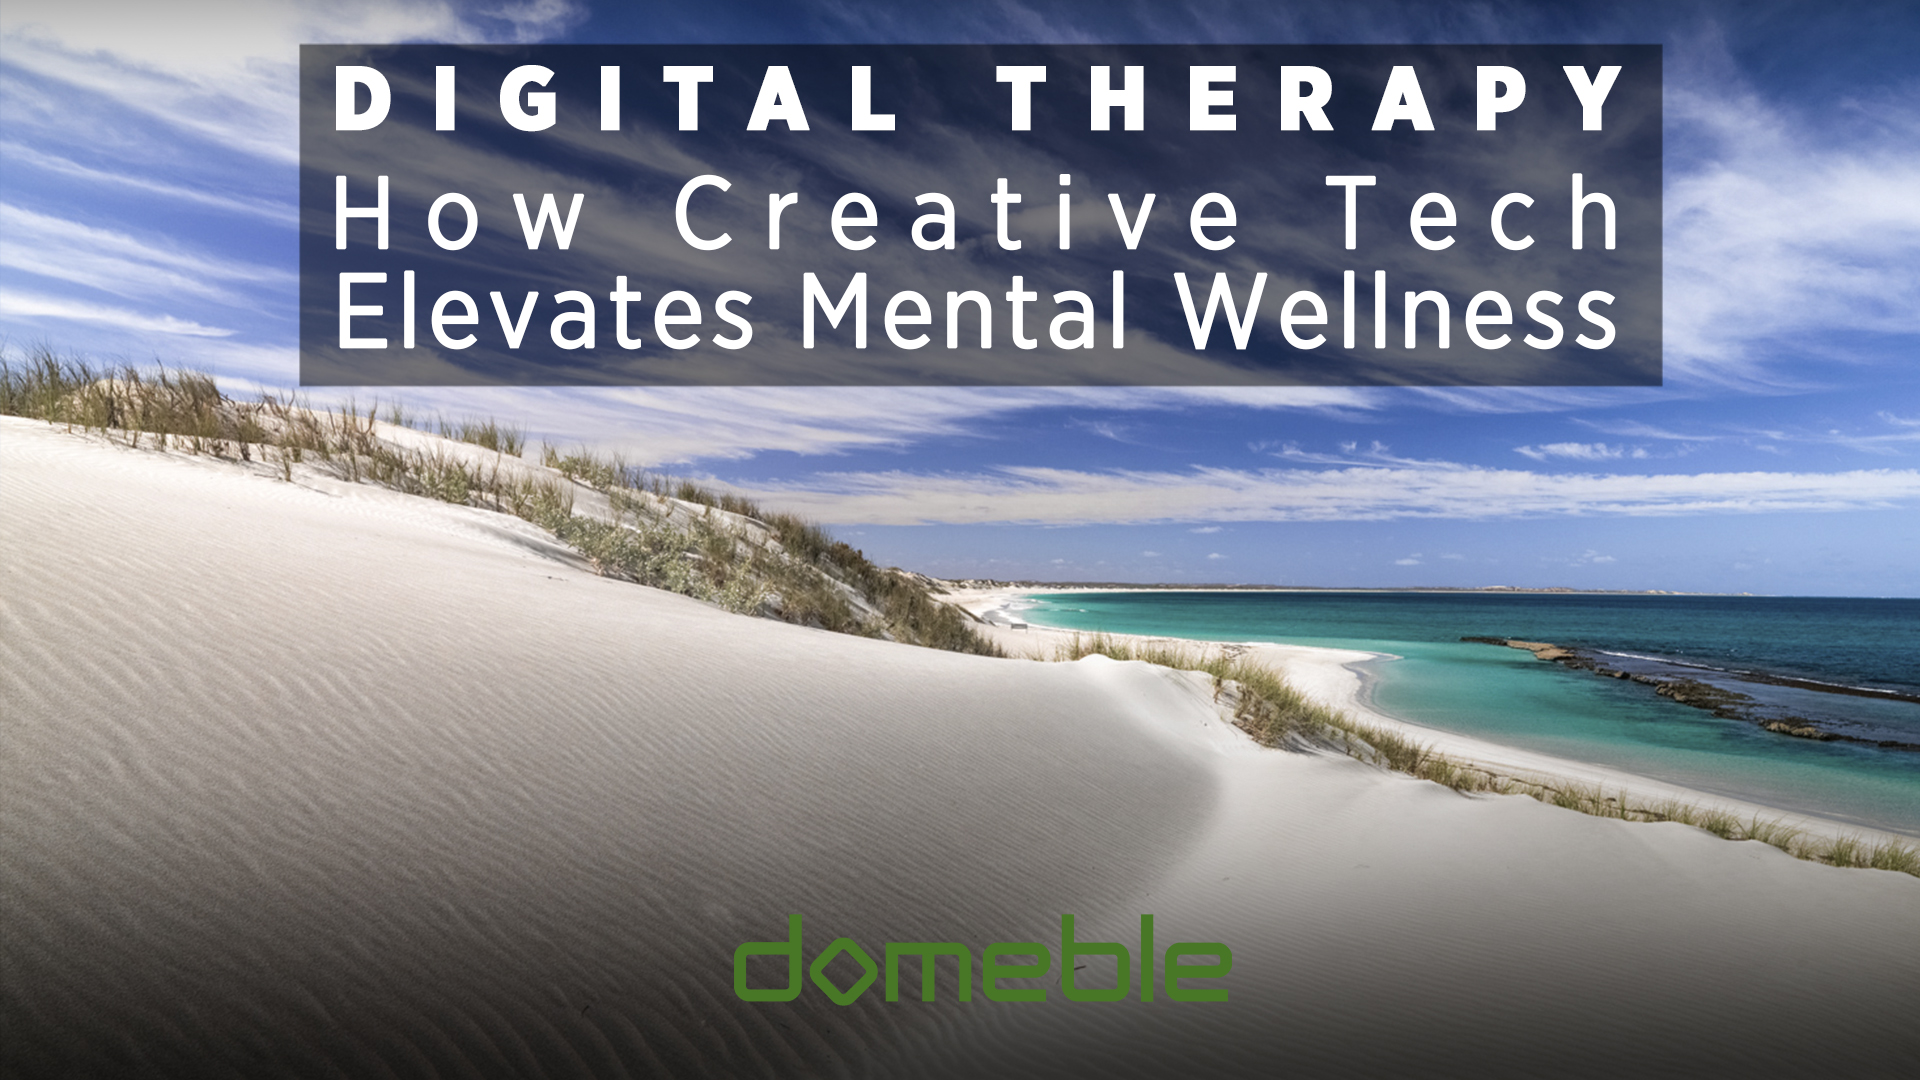 Digital Therapy: How Creative Tech Elevates Mental Wellness